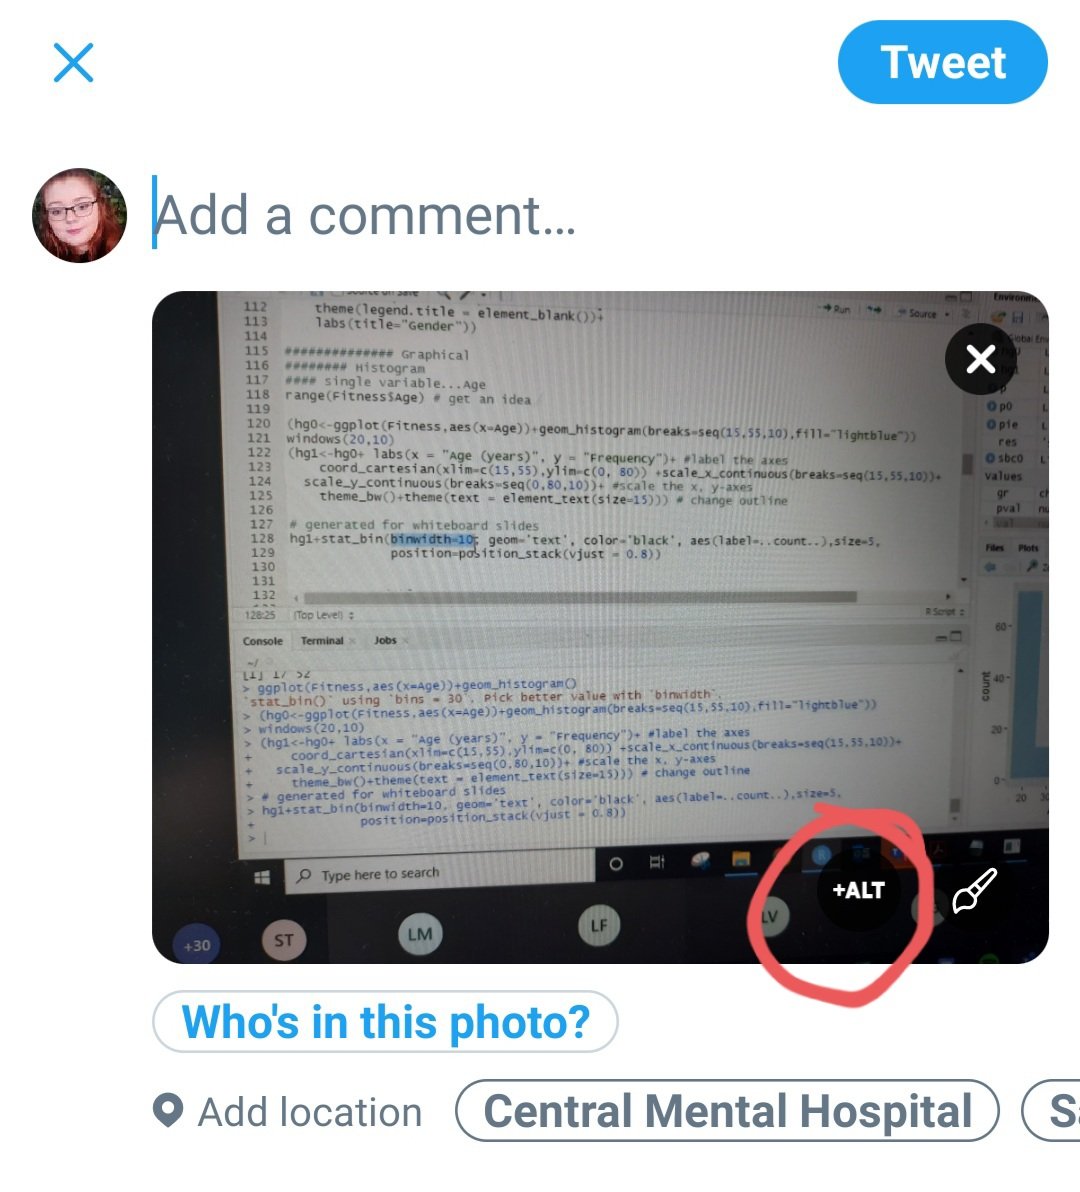 So how do you go about adding alt text to your post? When you load an image, a little black +ALT button will appear on the image (image 1). If you press this, then your view will change to a write alt text page which is the image with a blank text box at the bottom (image 2).